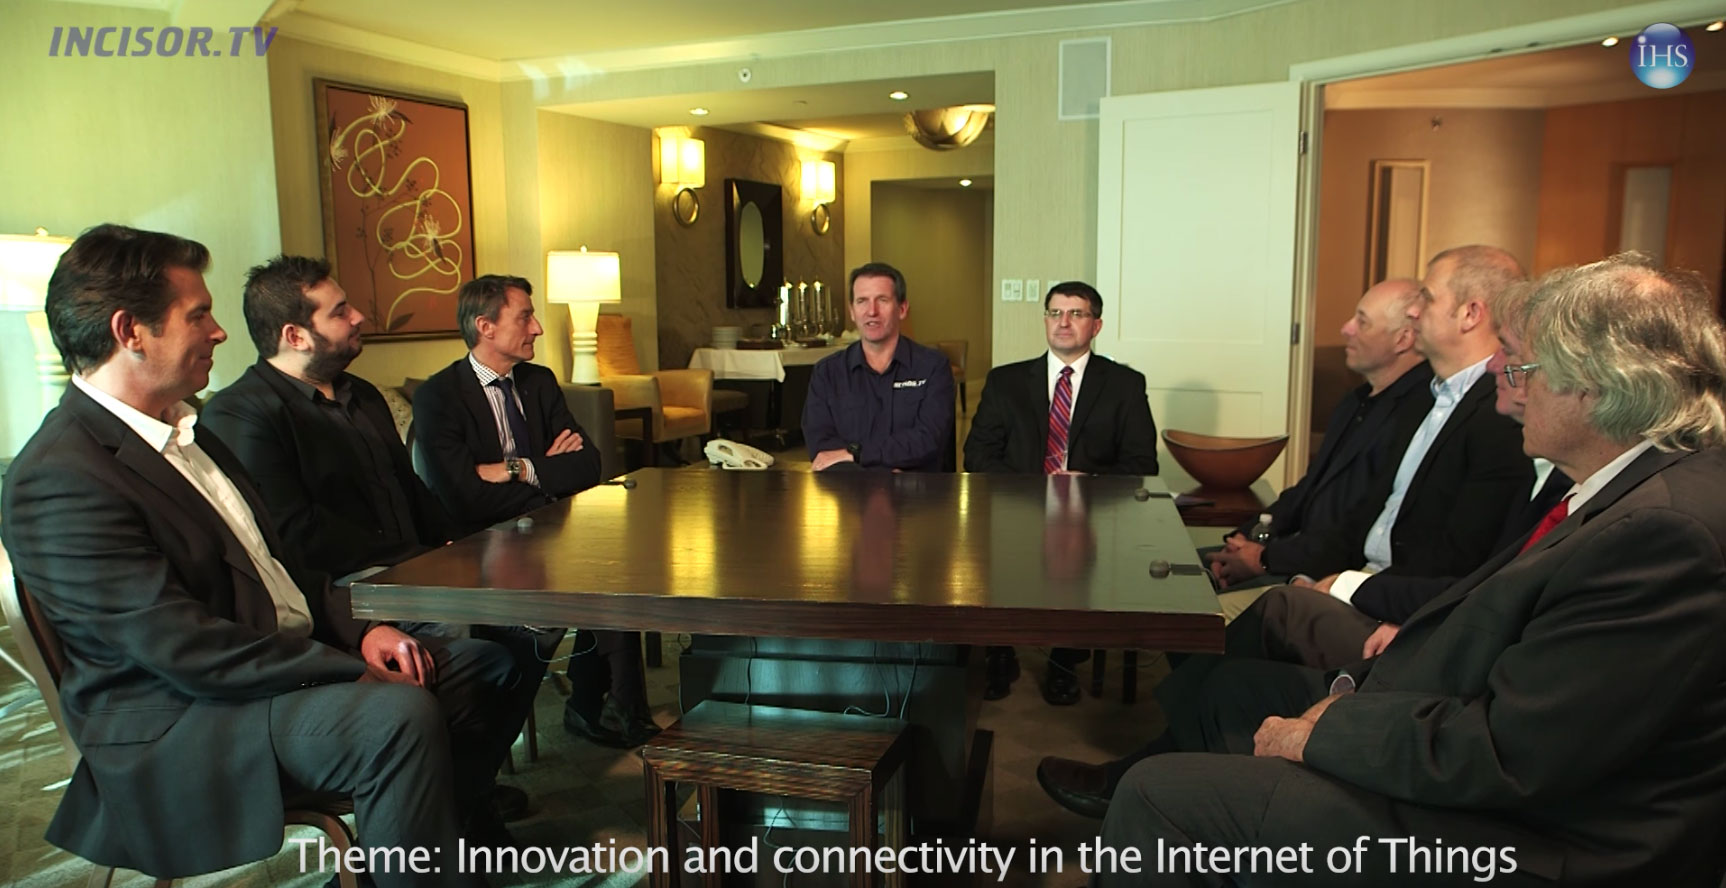 2015 Incisor.TV USA IoT Roundtable - Innovation and connectivity in the IoT